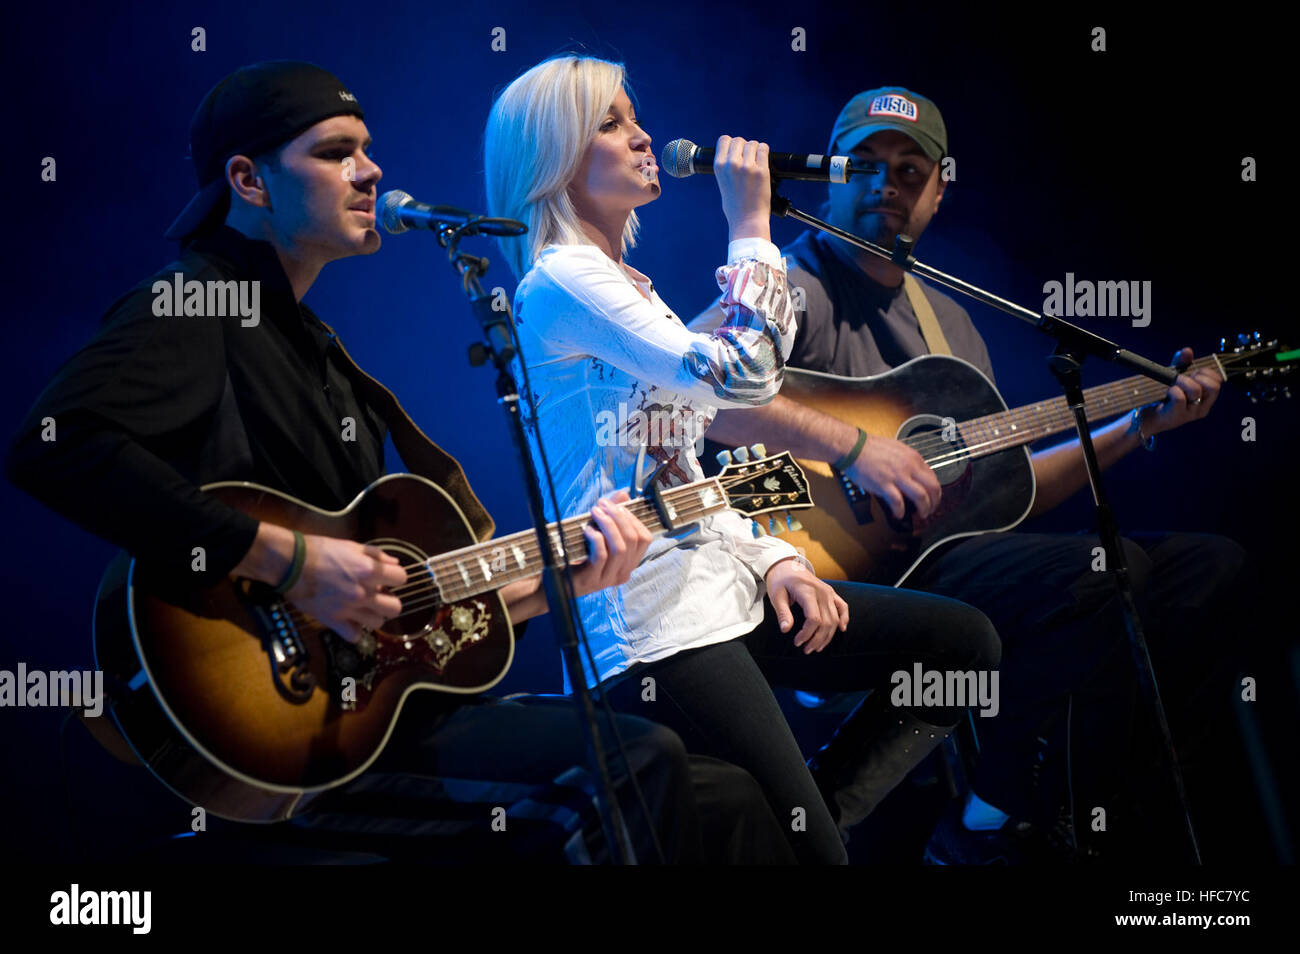 American Idol contestant and country musician Kellie Pickler and members of her band Joshua Henson, left, and Ryan Ochsner perform for U.S. service members during the first stop of the 2008 USO Holiday Tour on Ramstein Air Force Base, Germany, Dec. 16, 2008. The tour?s host, Chairman of the Joint Chiefs of Staff Navy Adm. Mike Mullen, and his wife Deborah joined Kid Rock; comedians John Bowman, Lewis Black and Kathleen Madigan; actress Tichina Arnold and Pickler on the tour to boost the morale of service members stationed overseas during the holiday season. (DoD photo by Mass Communication Spe Stock Photo